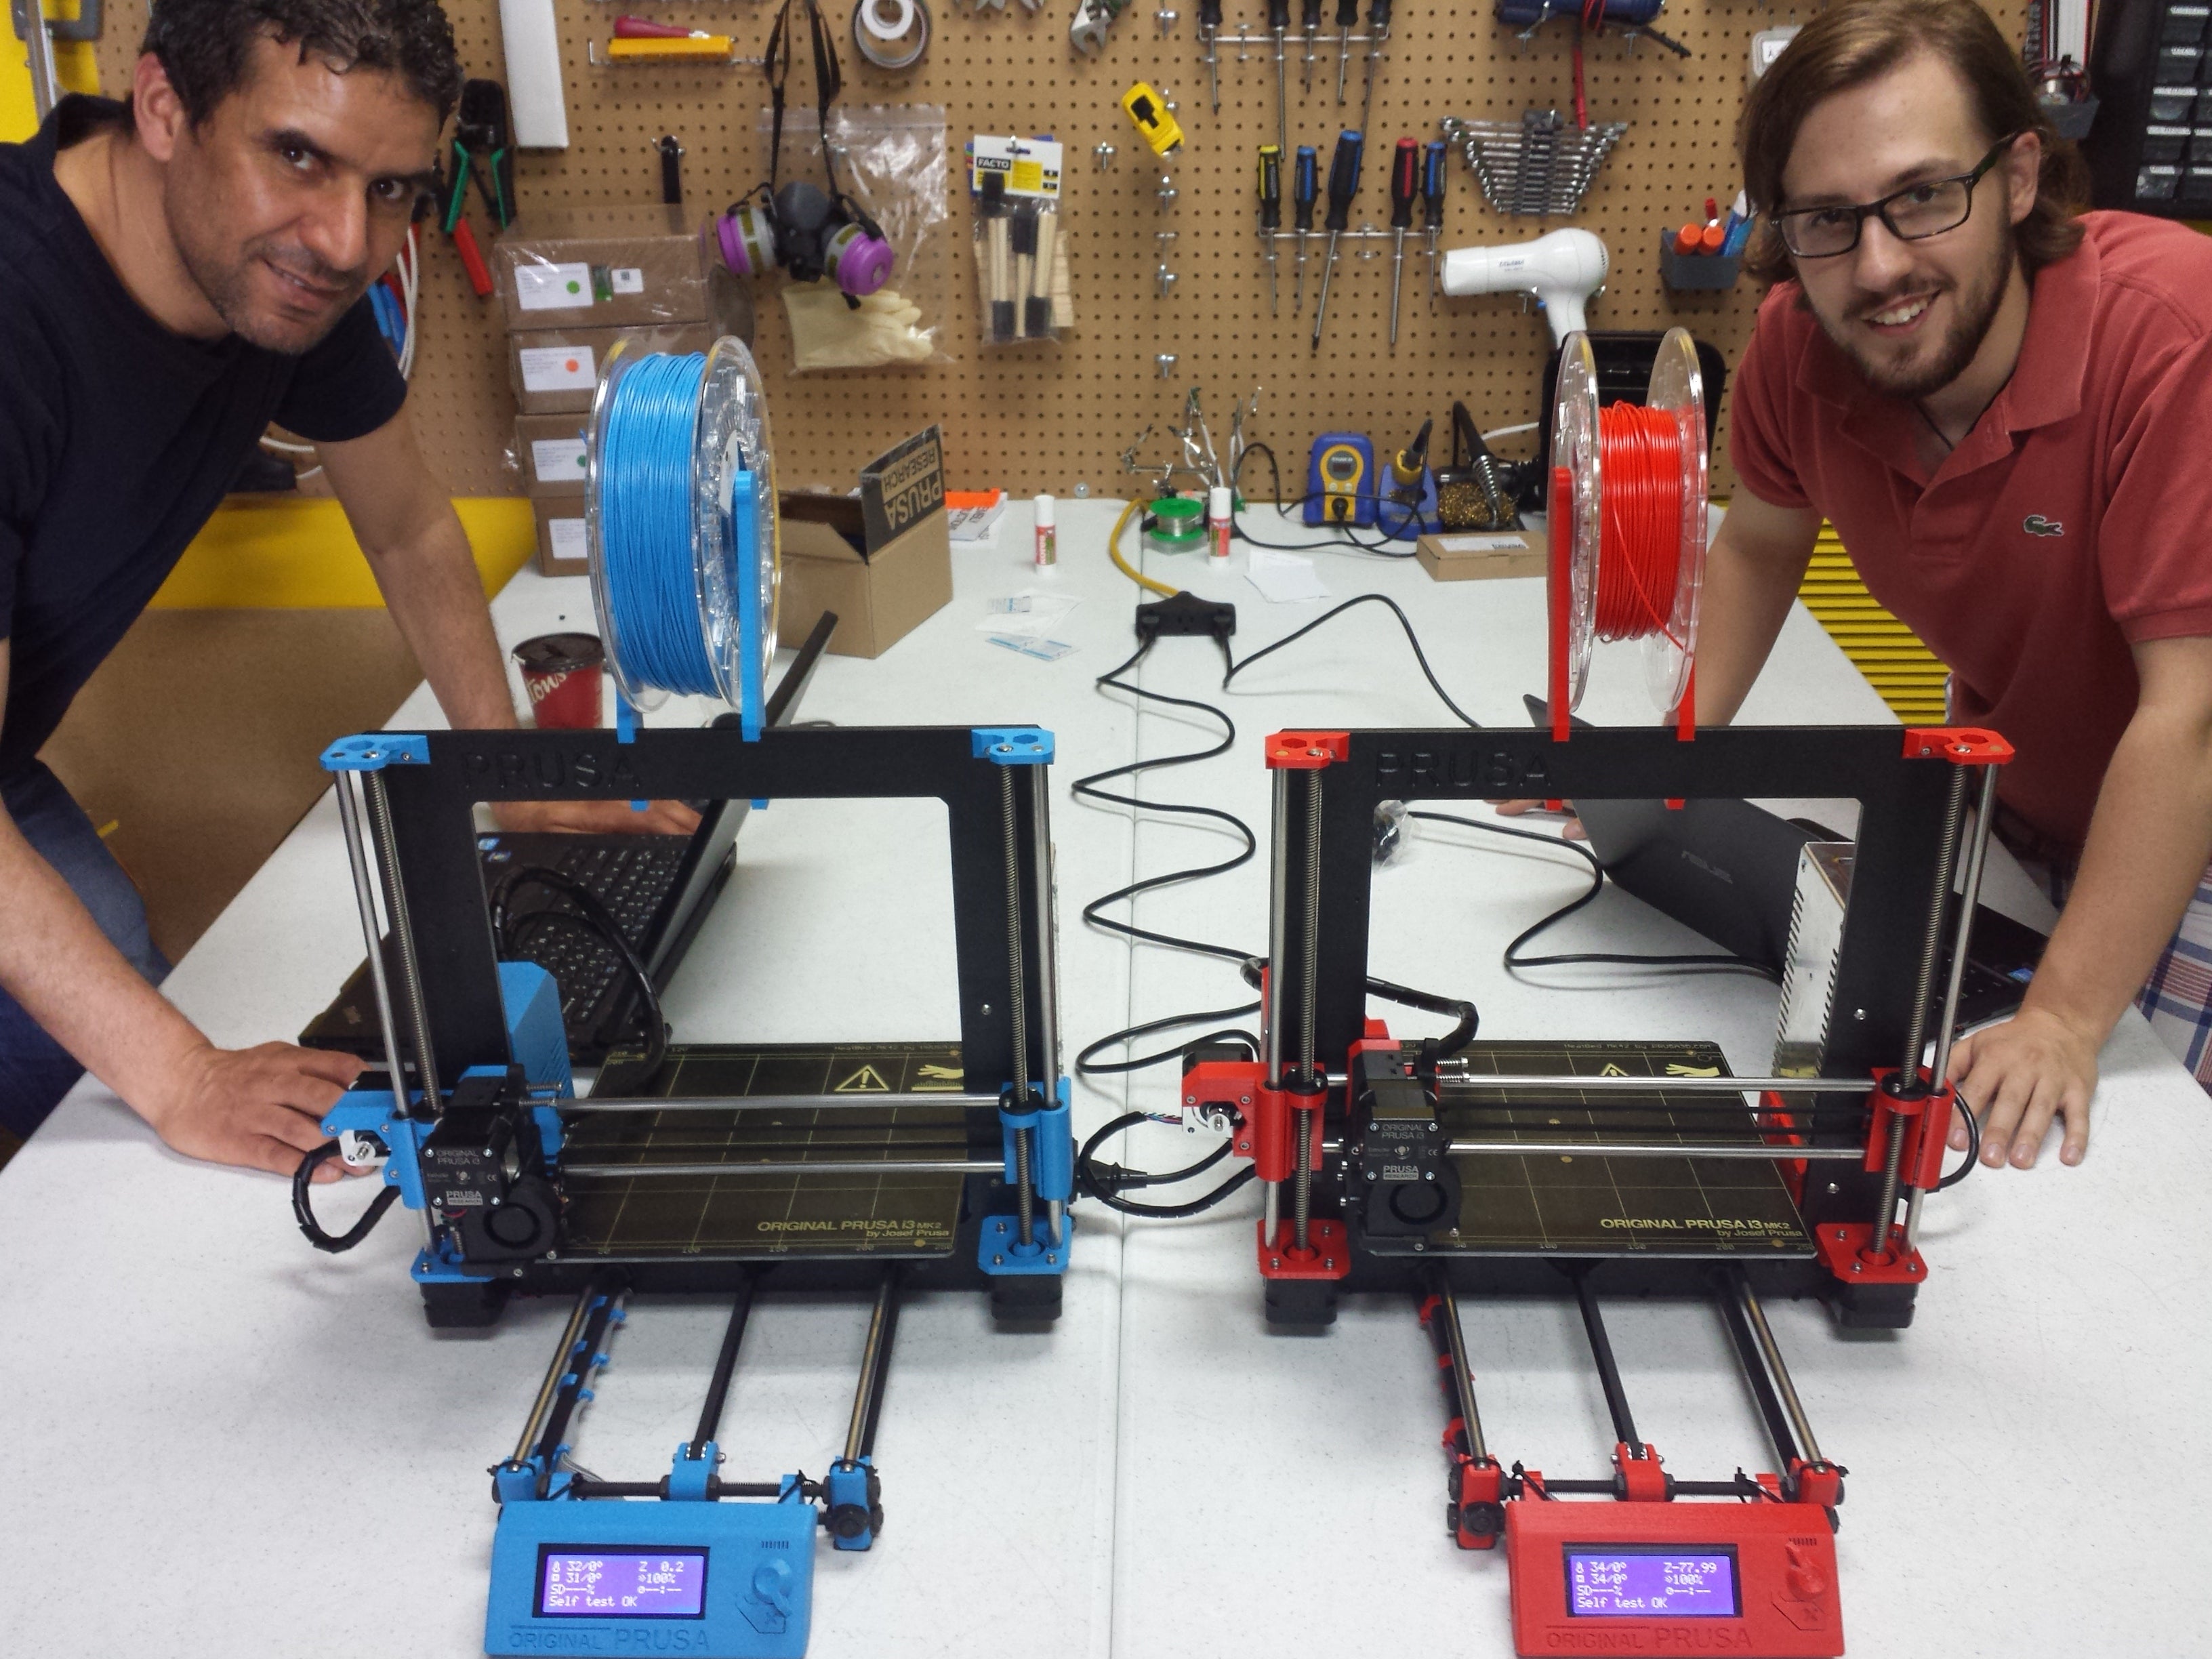 Picture of two assembled Prusa i3 MK2 3D printers by Voxel Factory